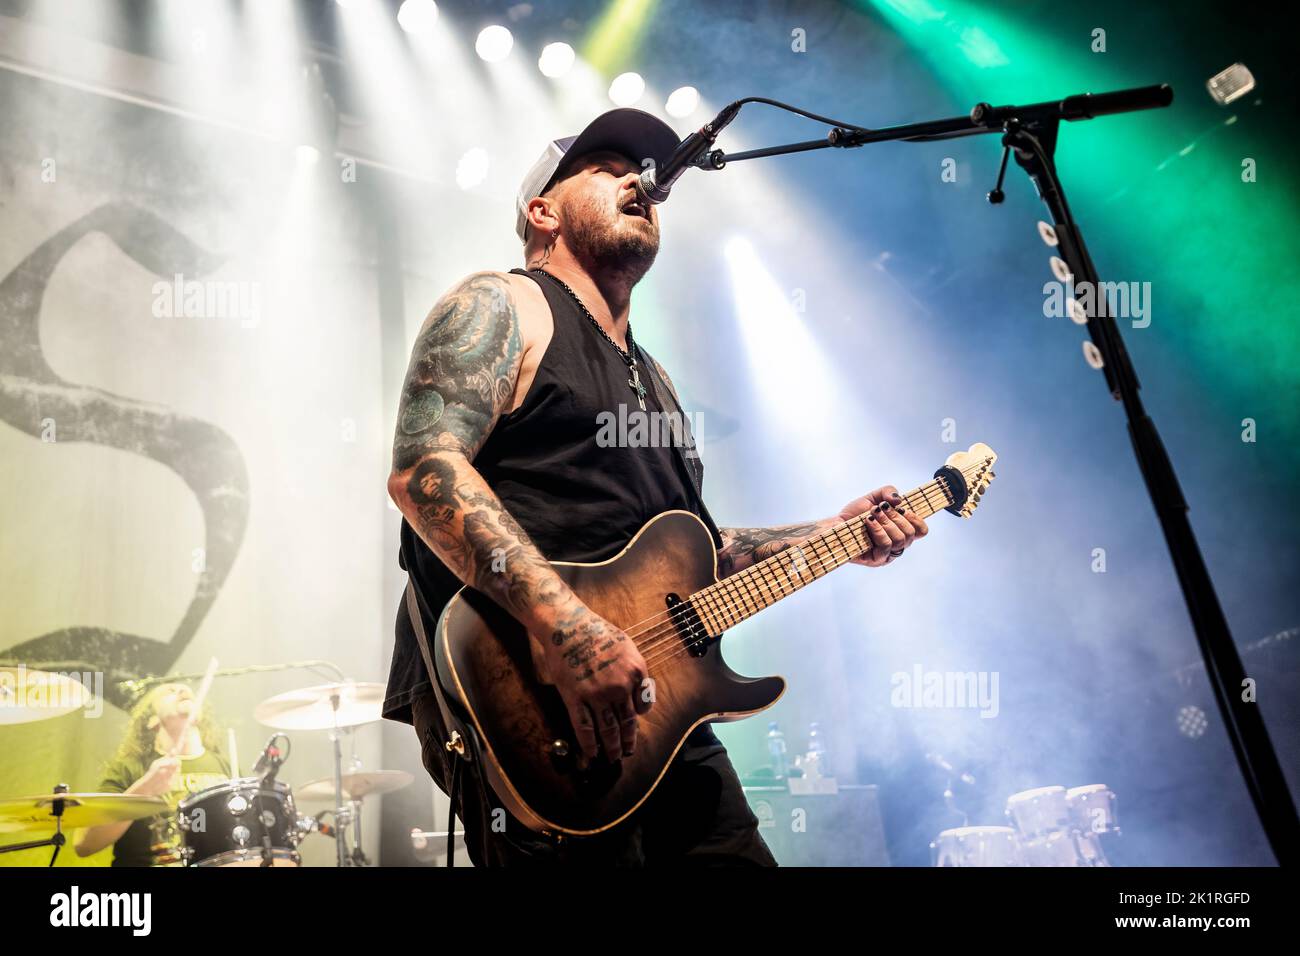 Oslo, Norway. 17th, September 2022. The American rock band Black Stone Cherry performs a live concert at Rockefeller in Oslo. Here vocalist and guitarist Chris Robertson is seen live on stage. (Photo credit: Gonzales Photo - Terje Dokken). Stock Photo